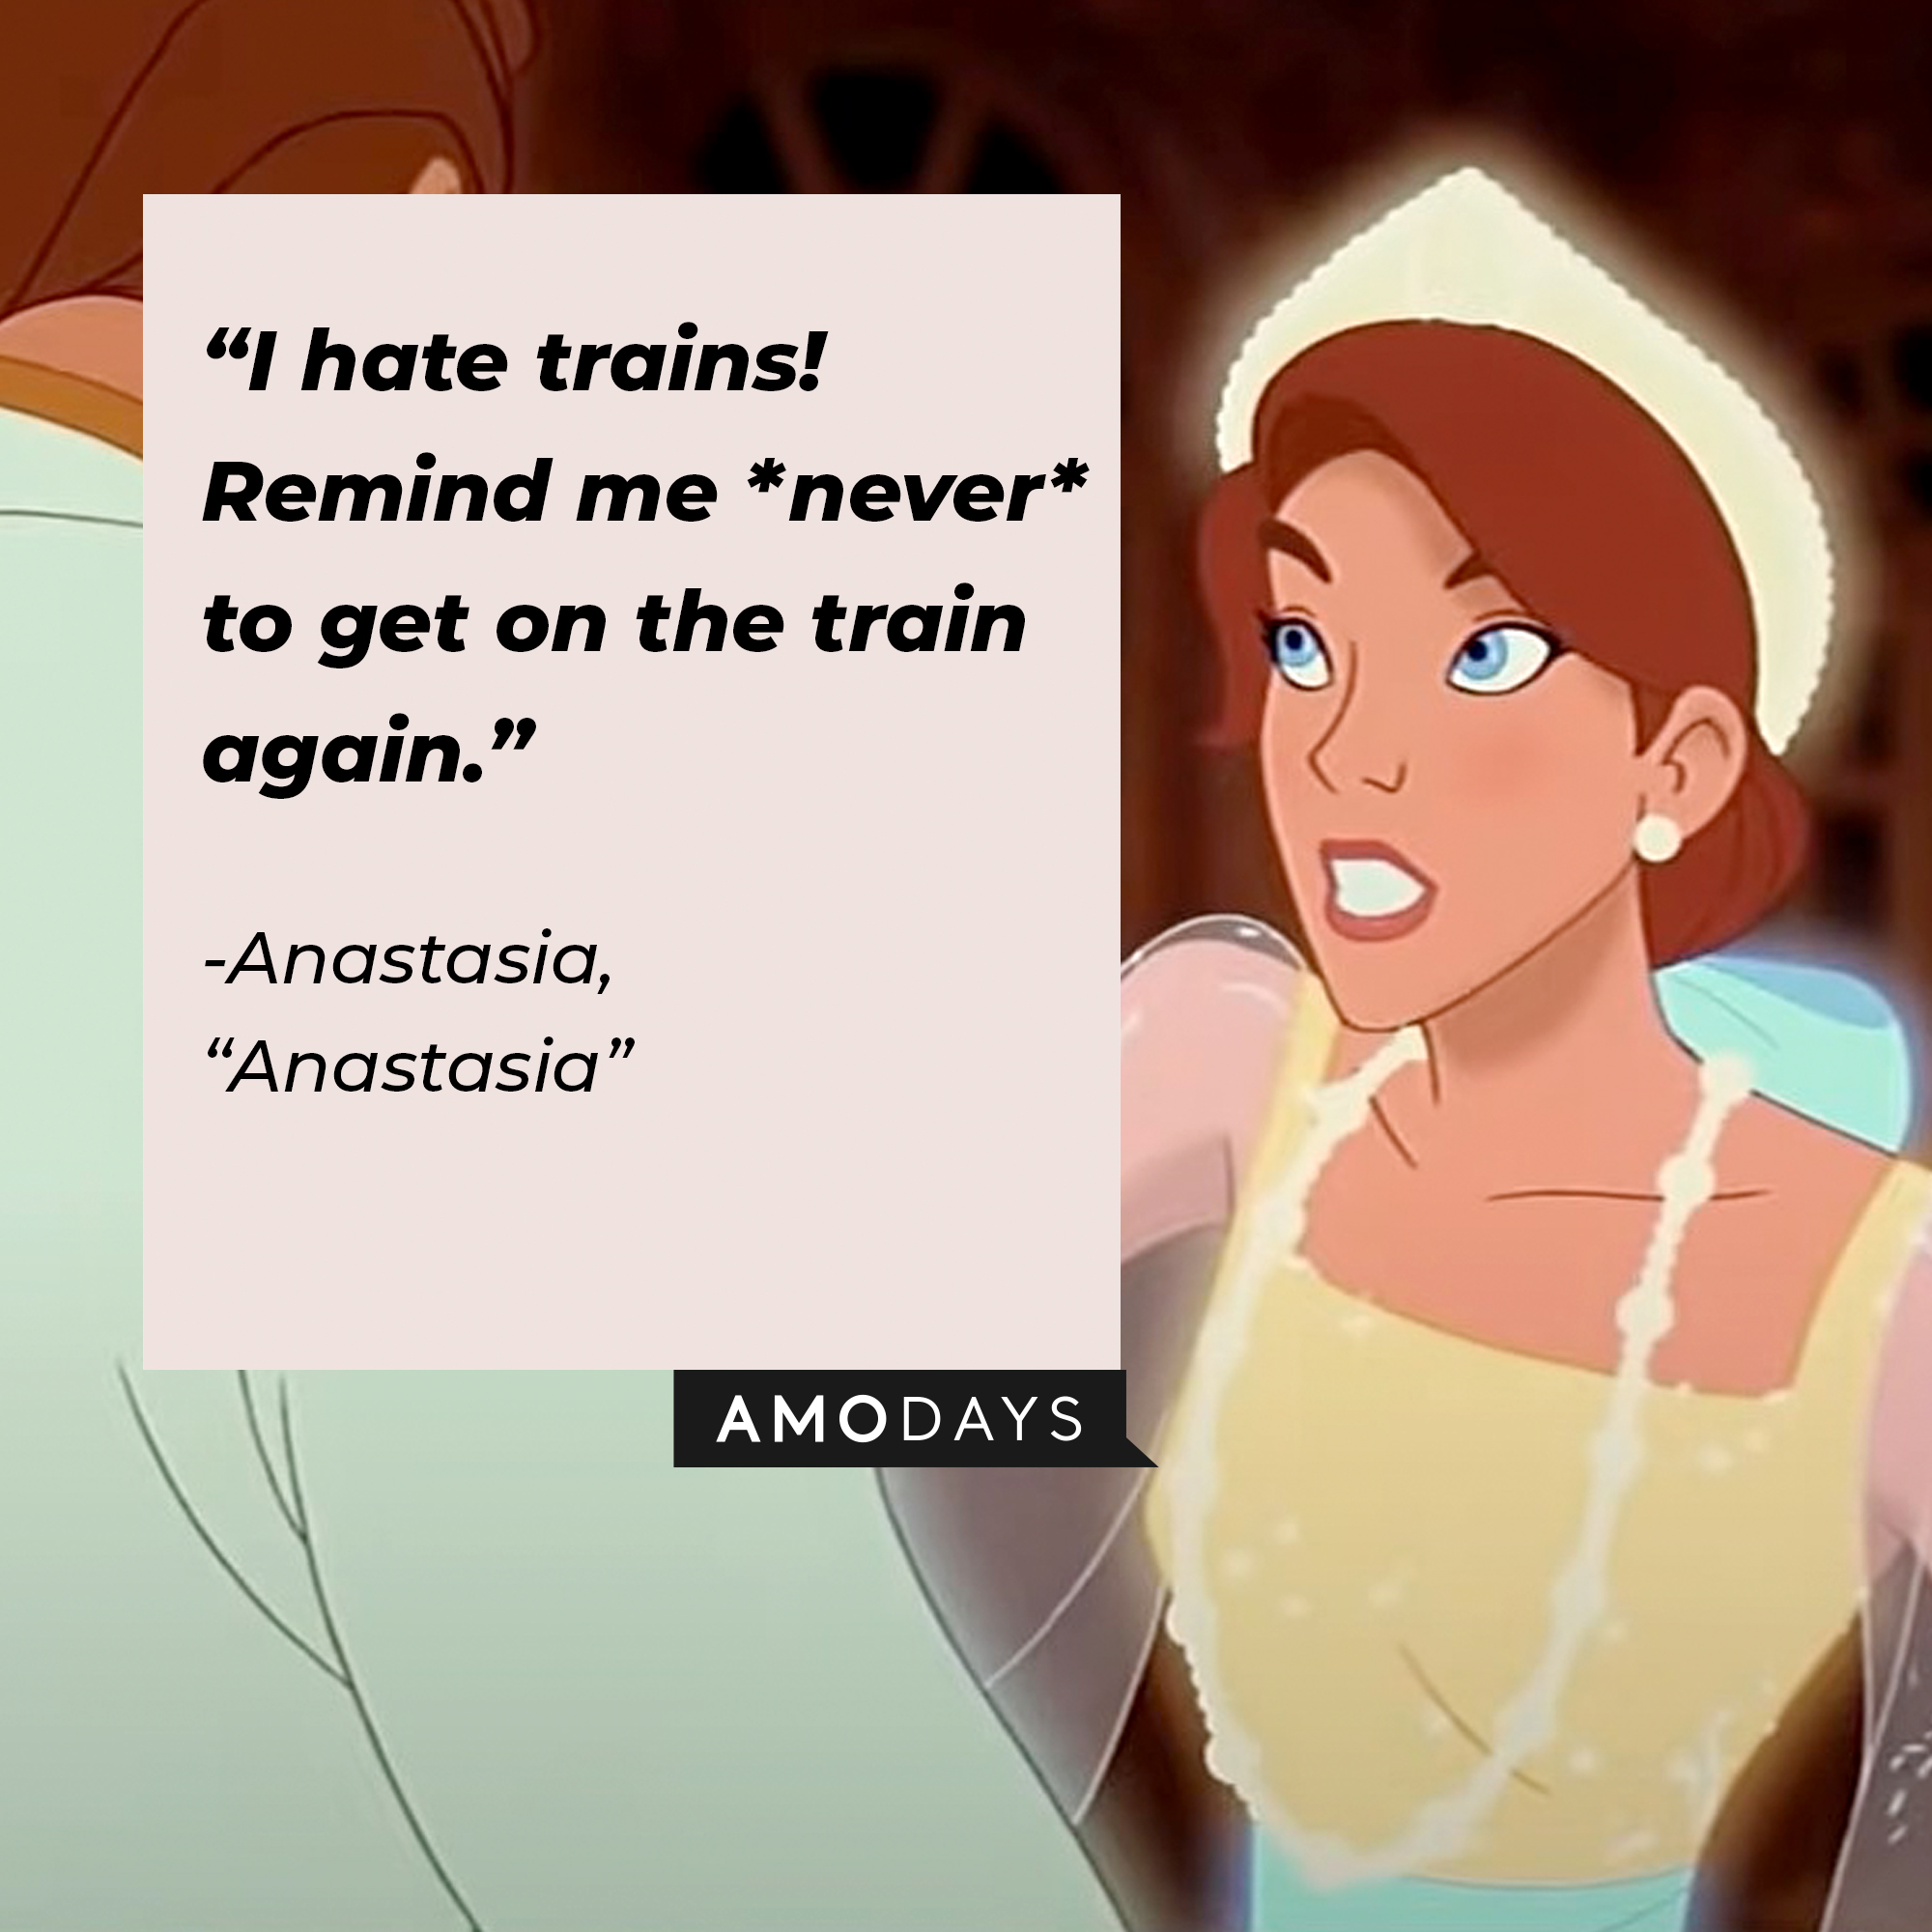 Image of Anastasia with the quote: "I hate trains! Remind me *never* to get on the train again." | Source: Youtube.com/20thCenturyStudios